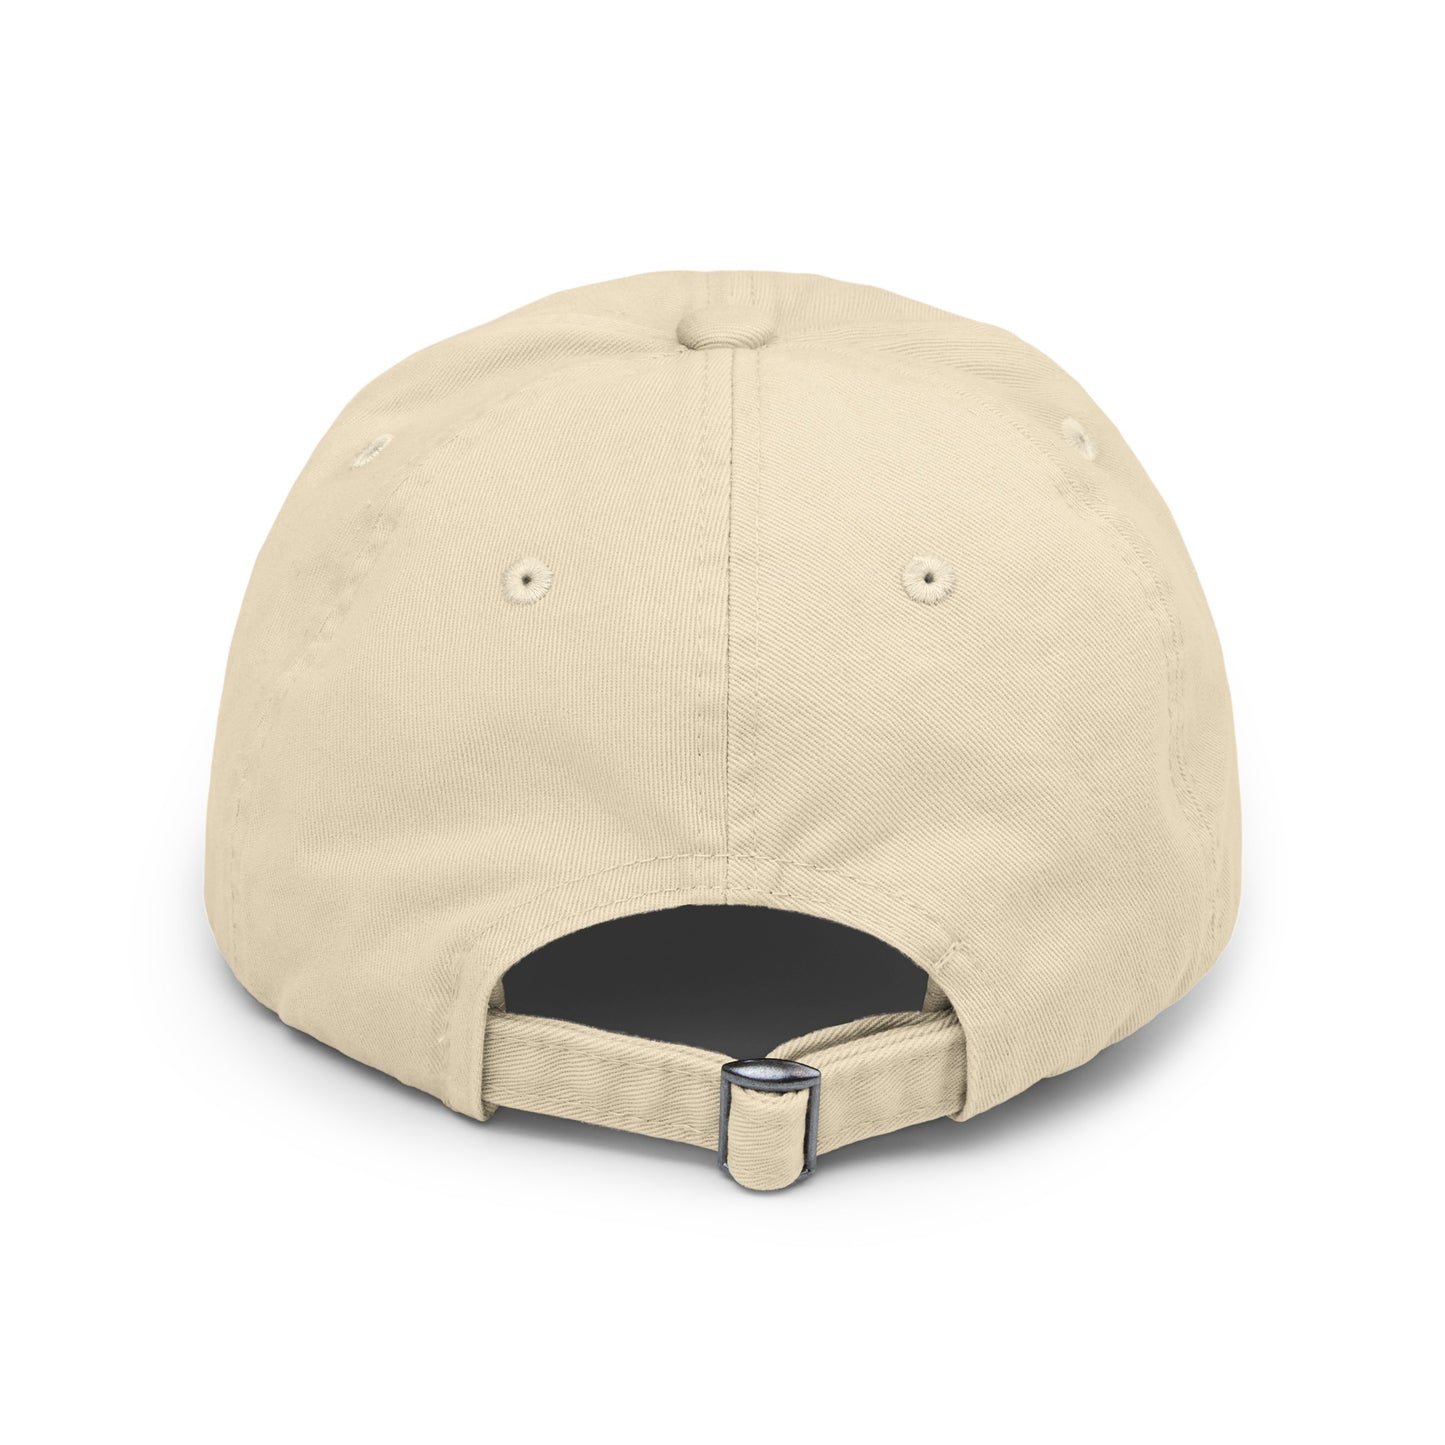 Tony South: "Slowly and Surely They Drew Their Plans Against Us" - Unisex Distressed Cap